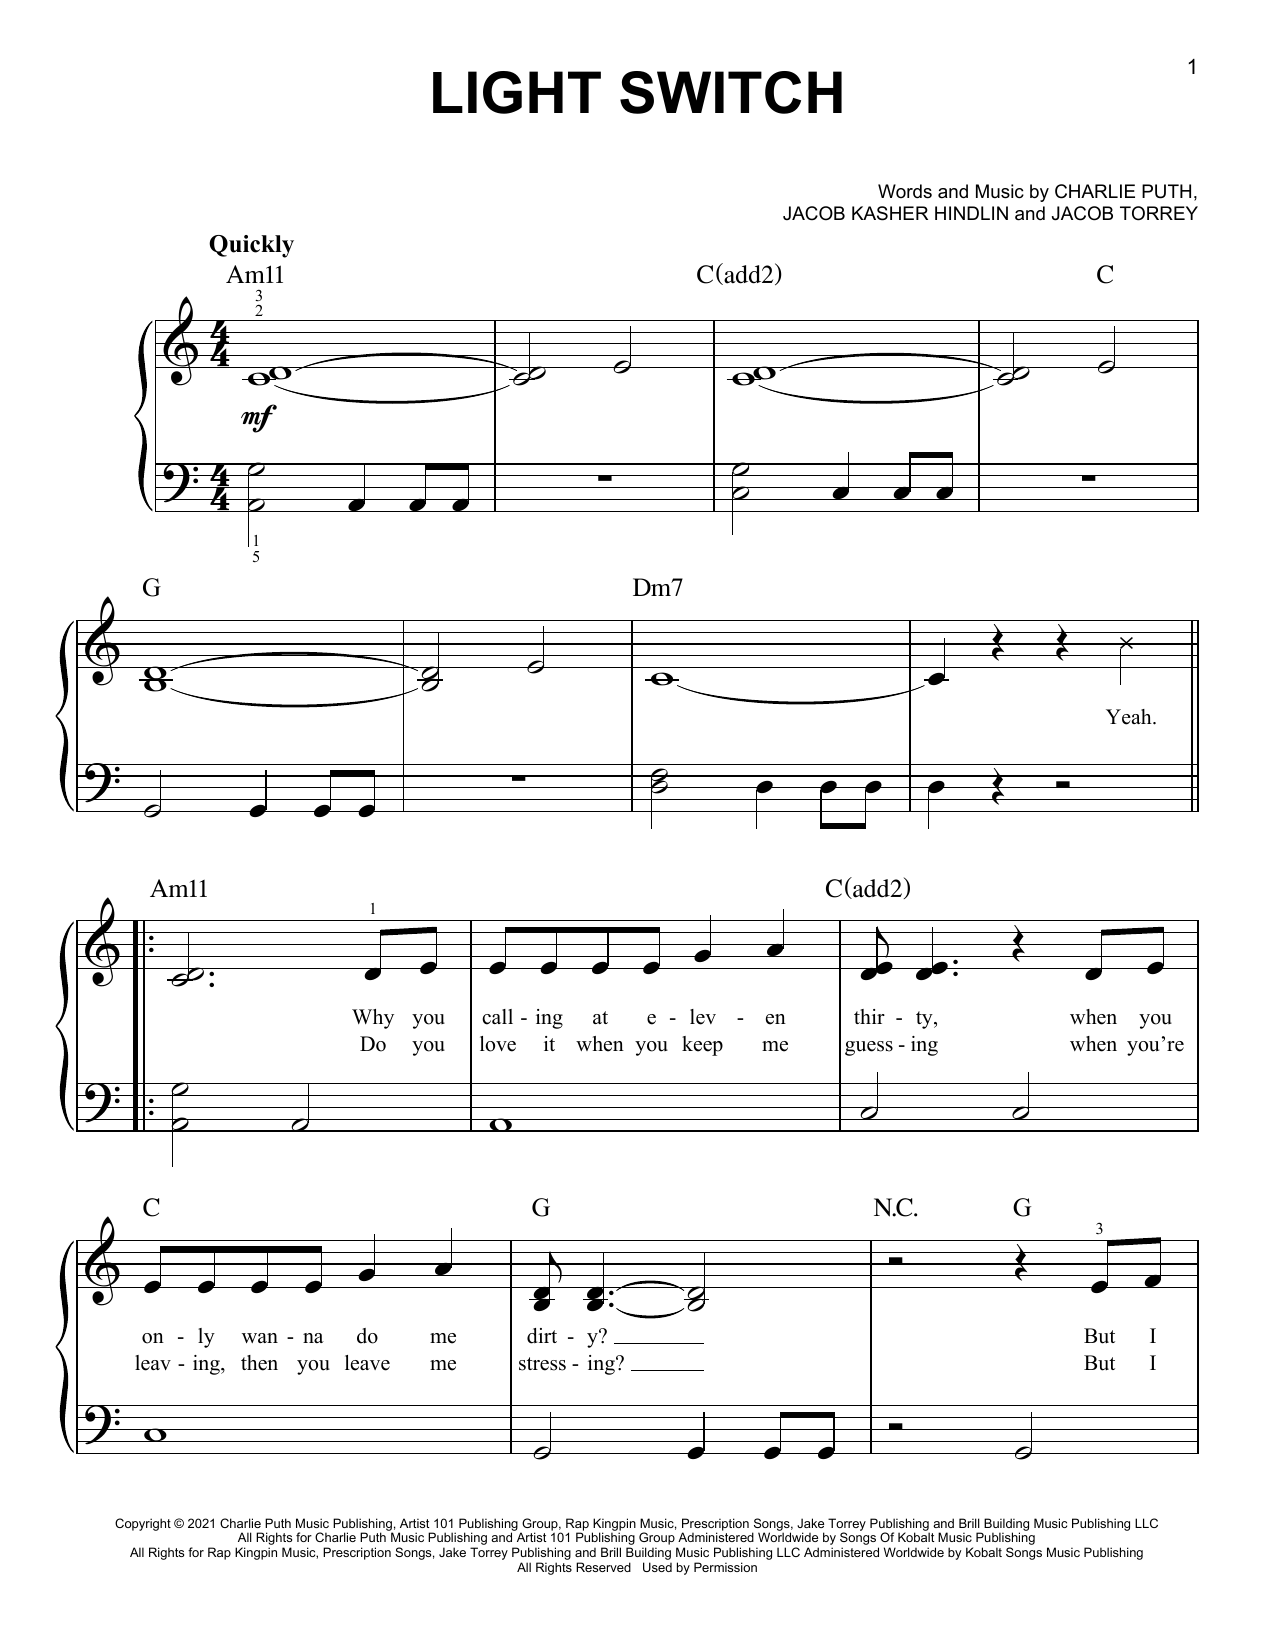 Download Charlie Puth Light Switch Sheet Music